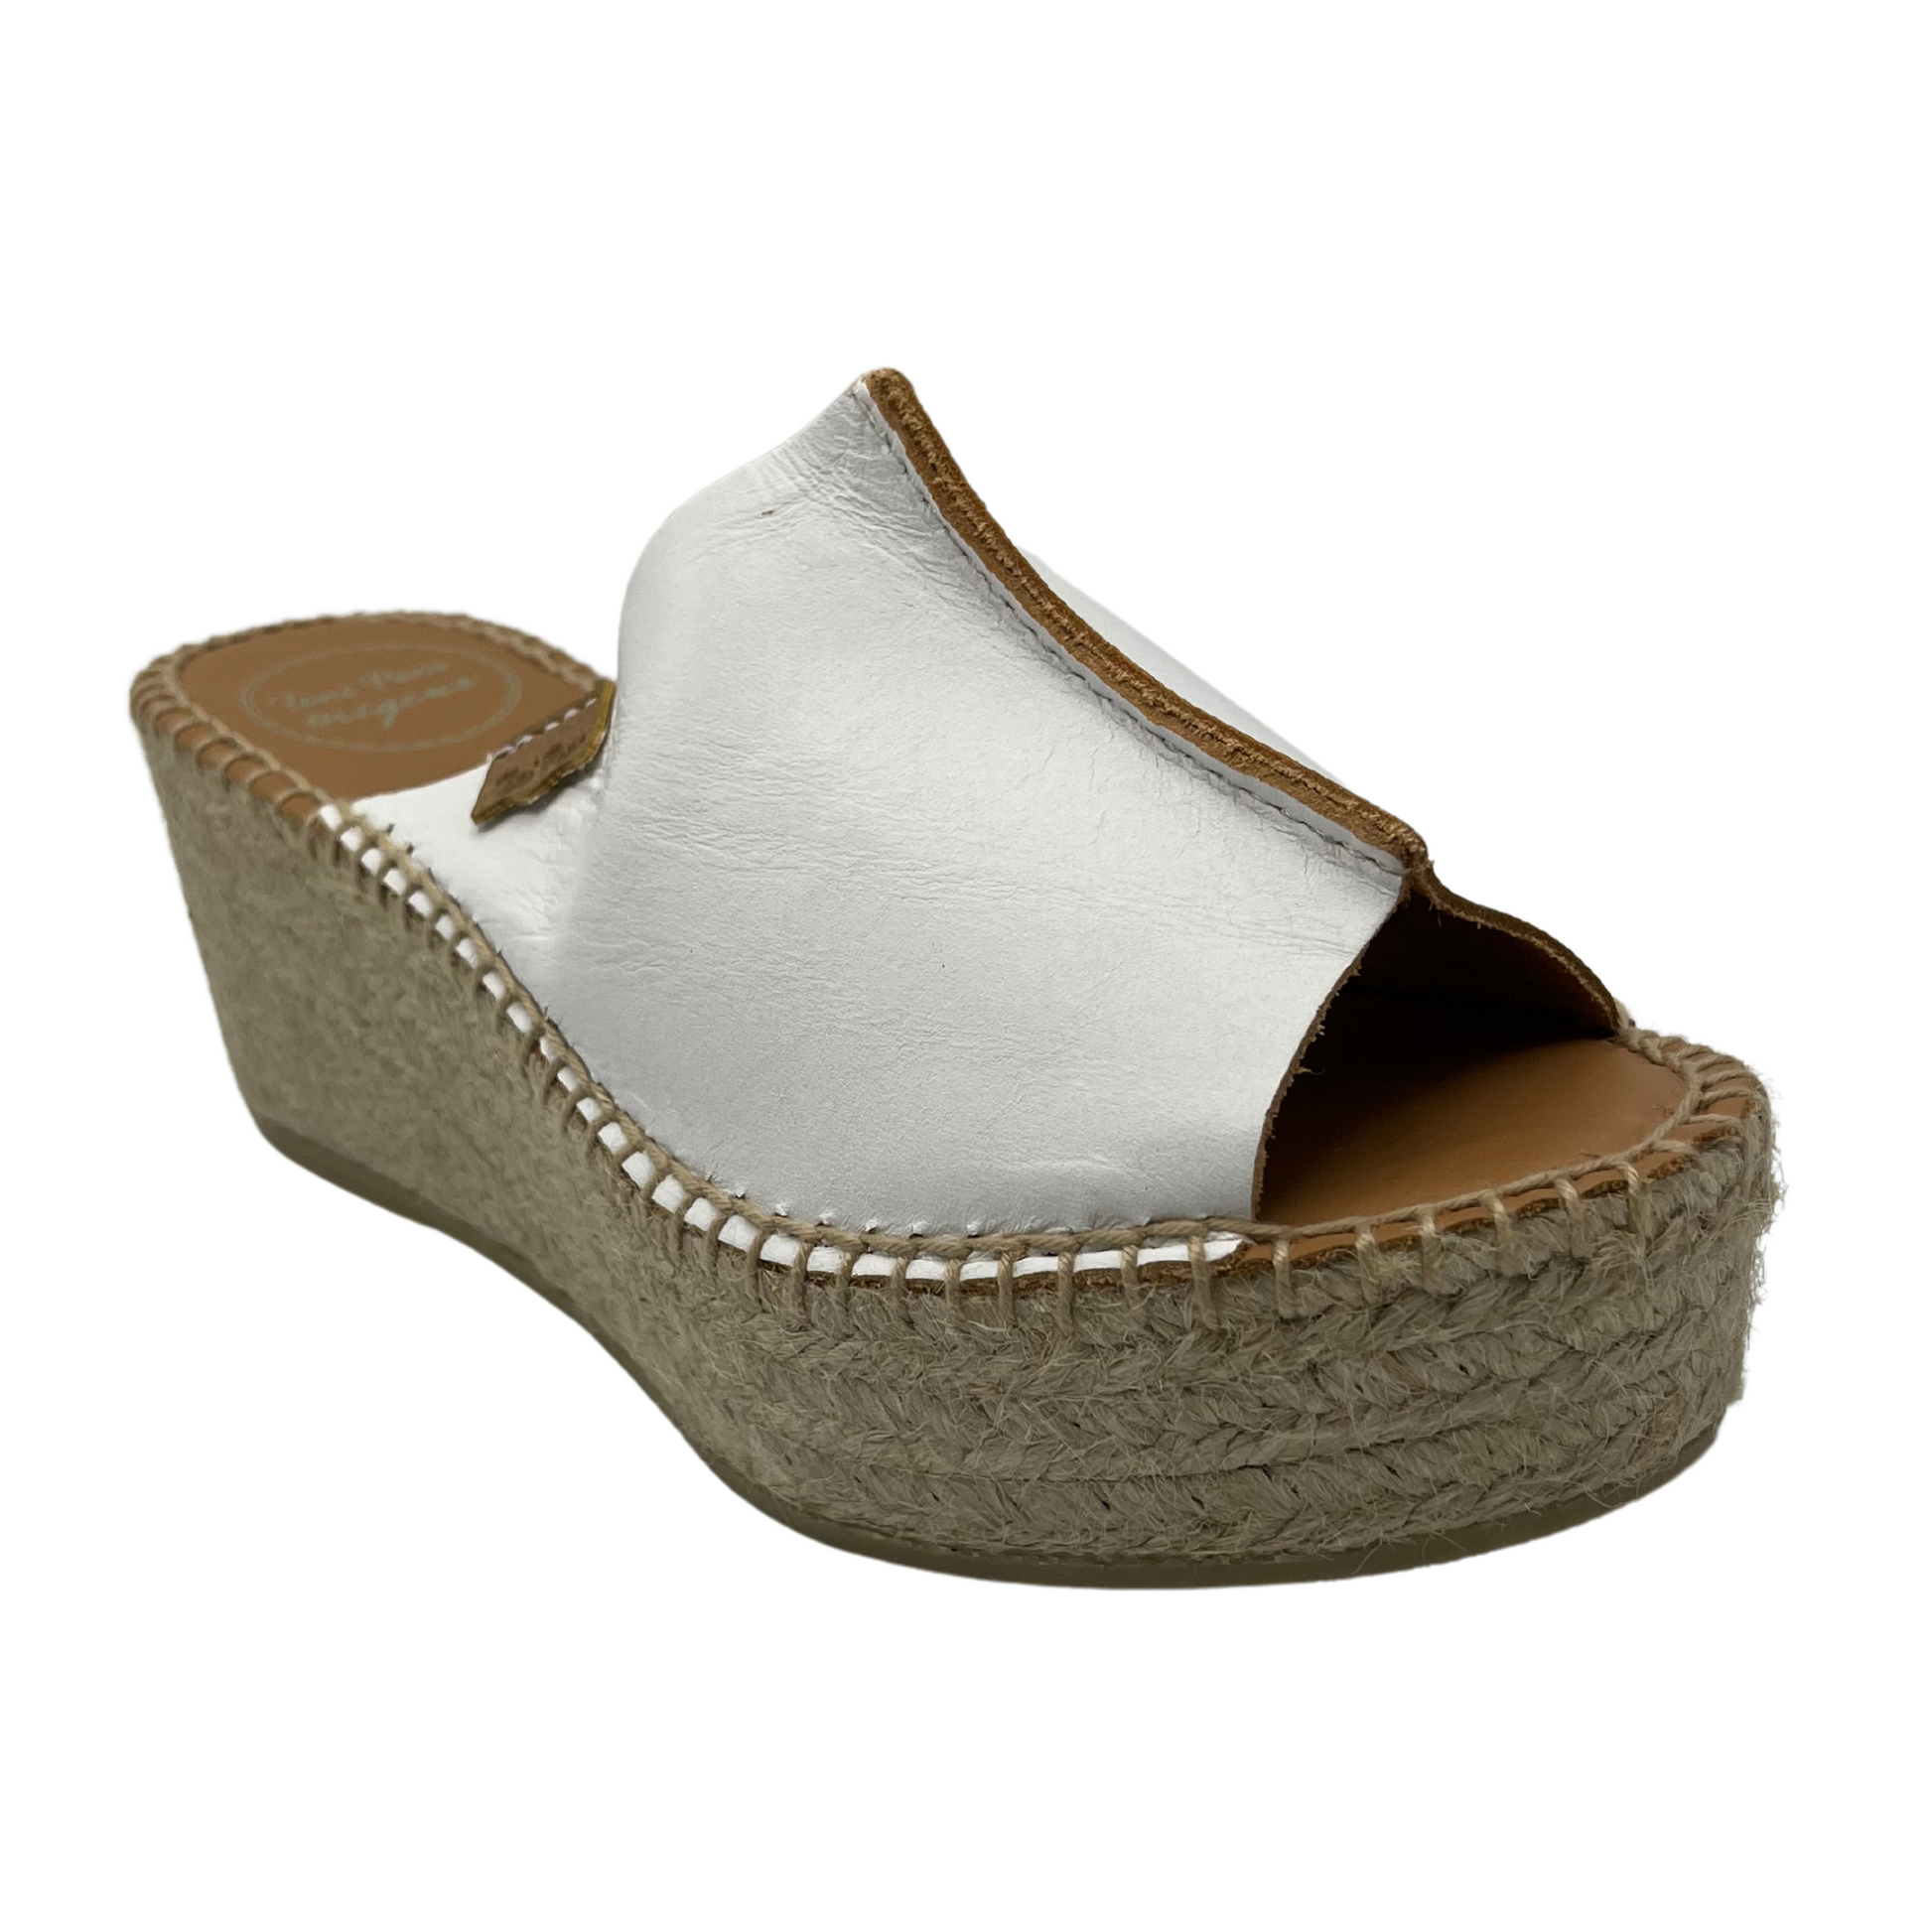 45 degree angled view of white leather wedge espadrille with handstitching around sole